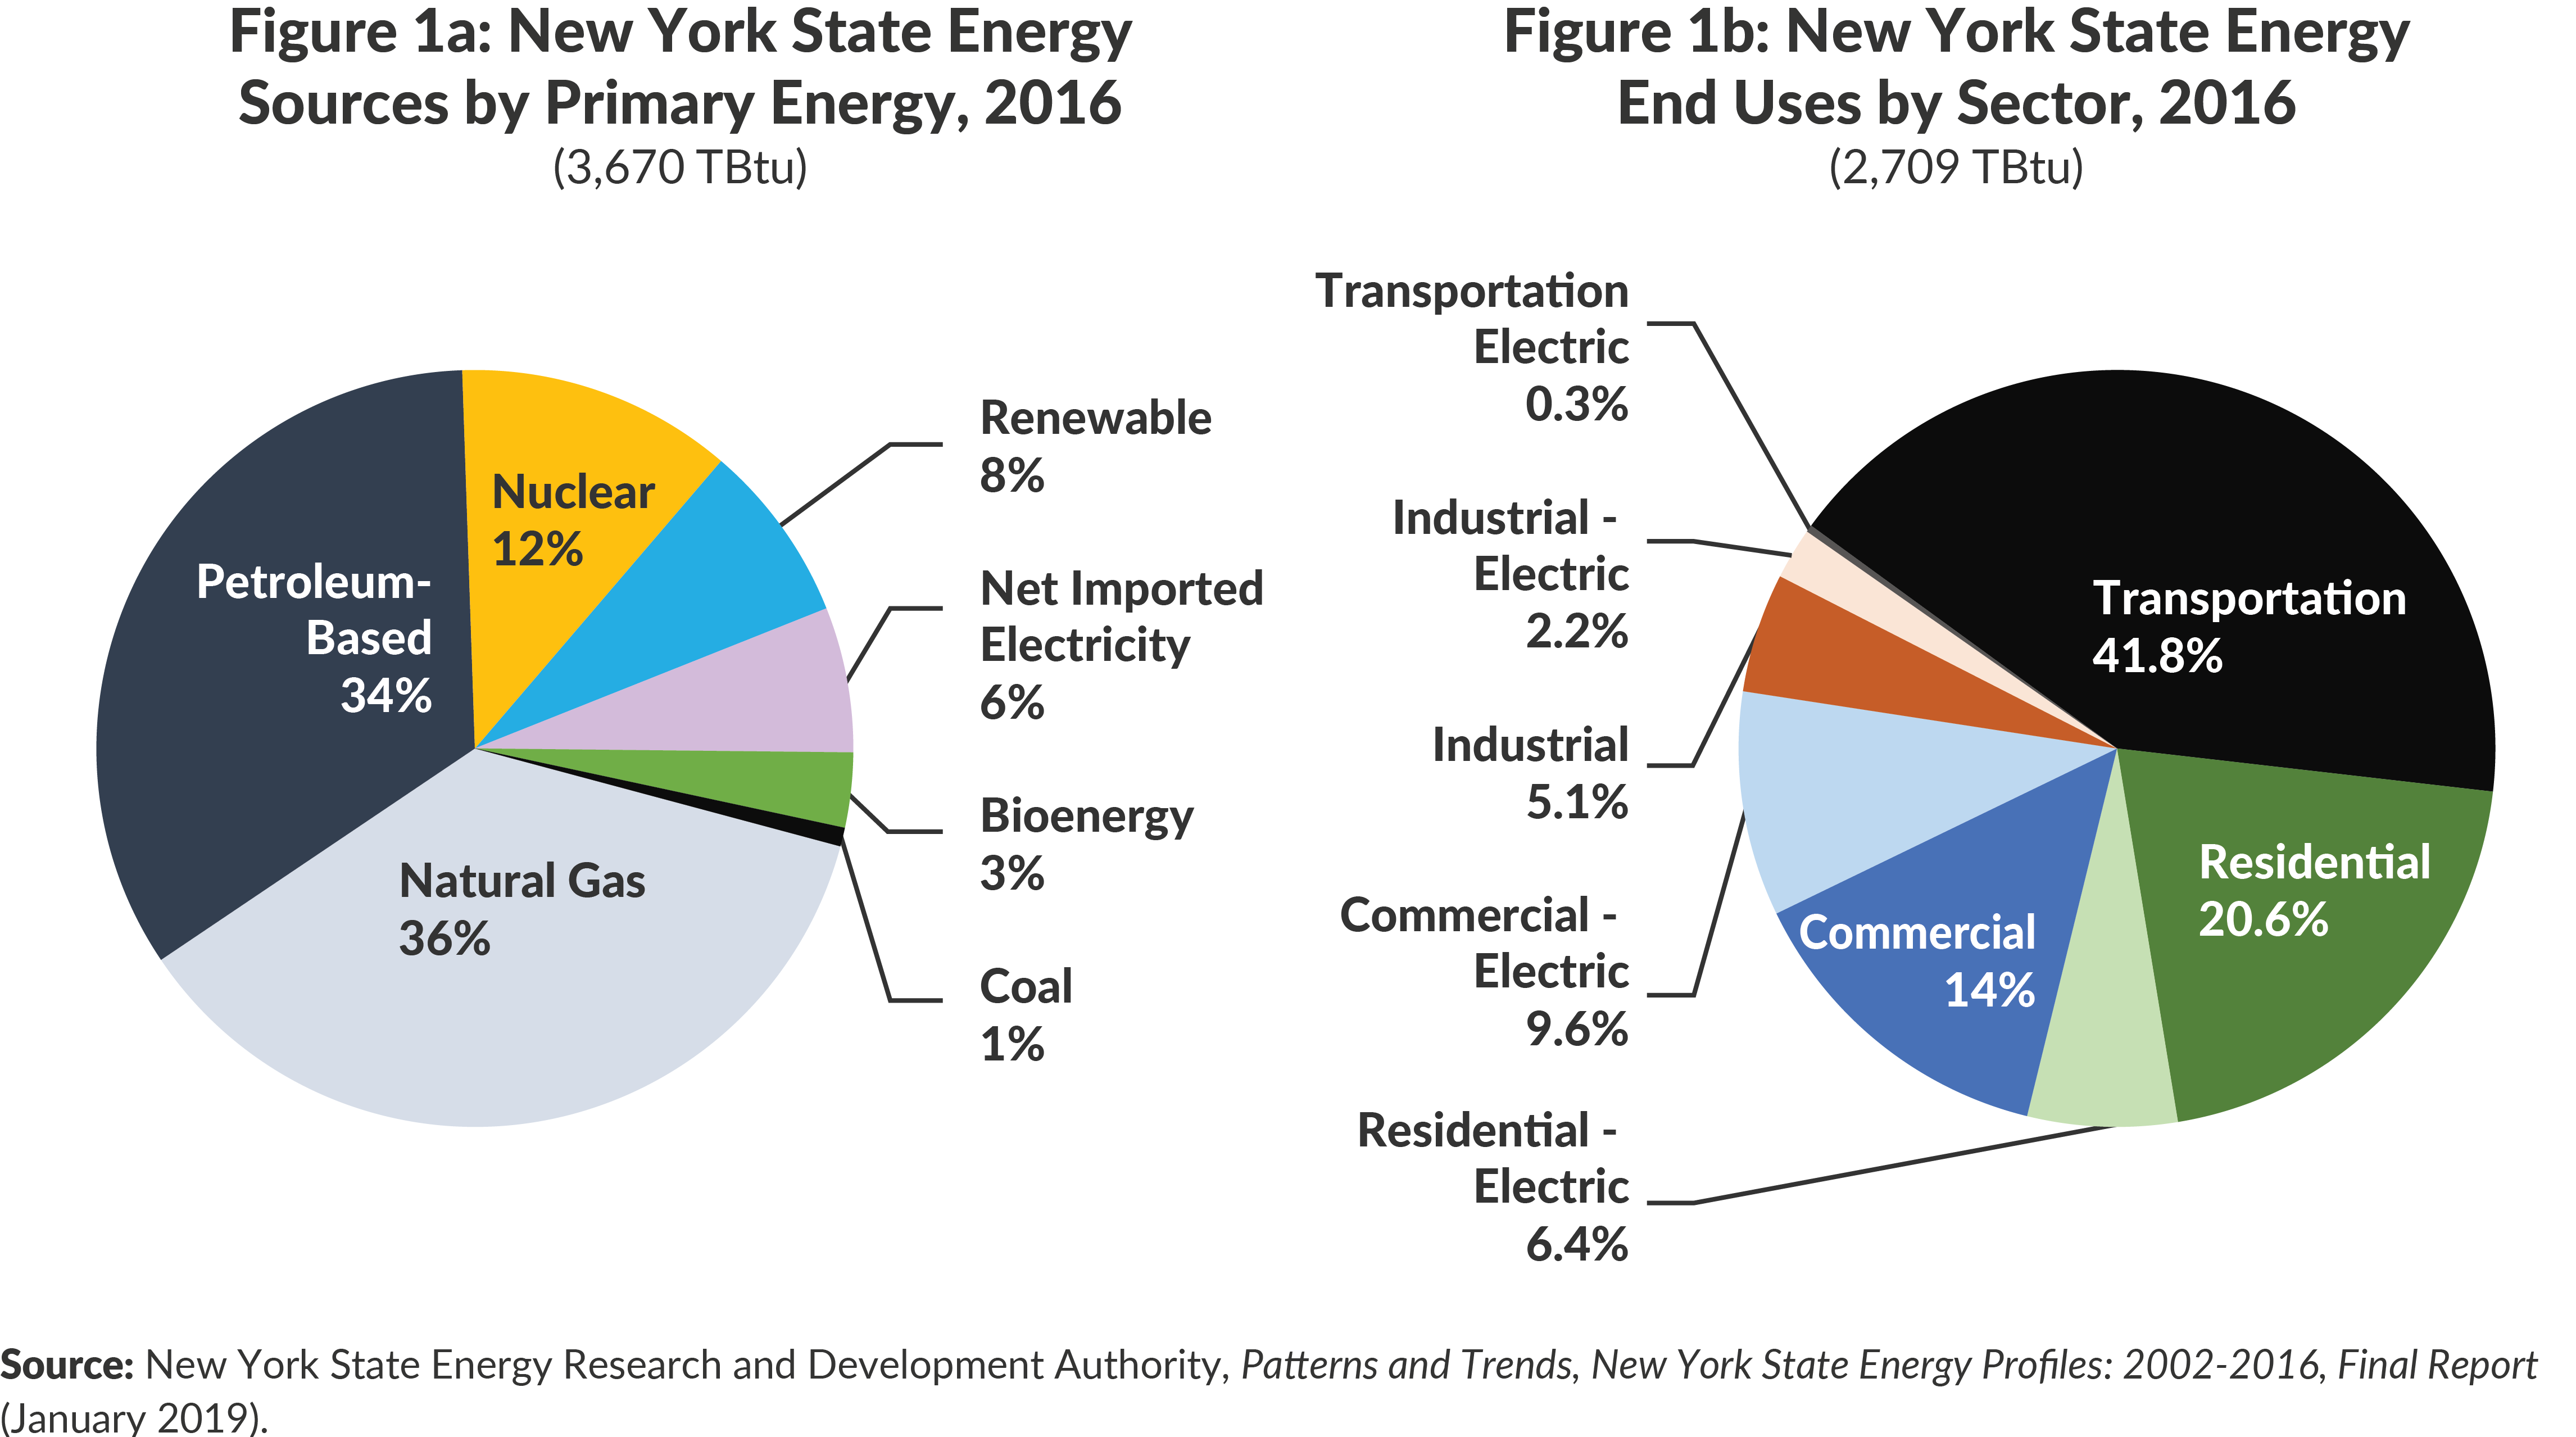 Figure 1a: New York State EnergySources by Primary Energy, 2016